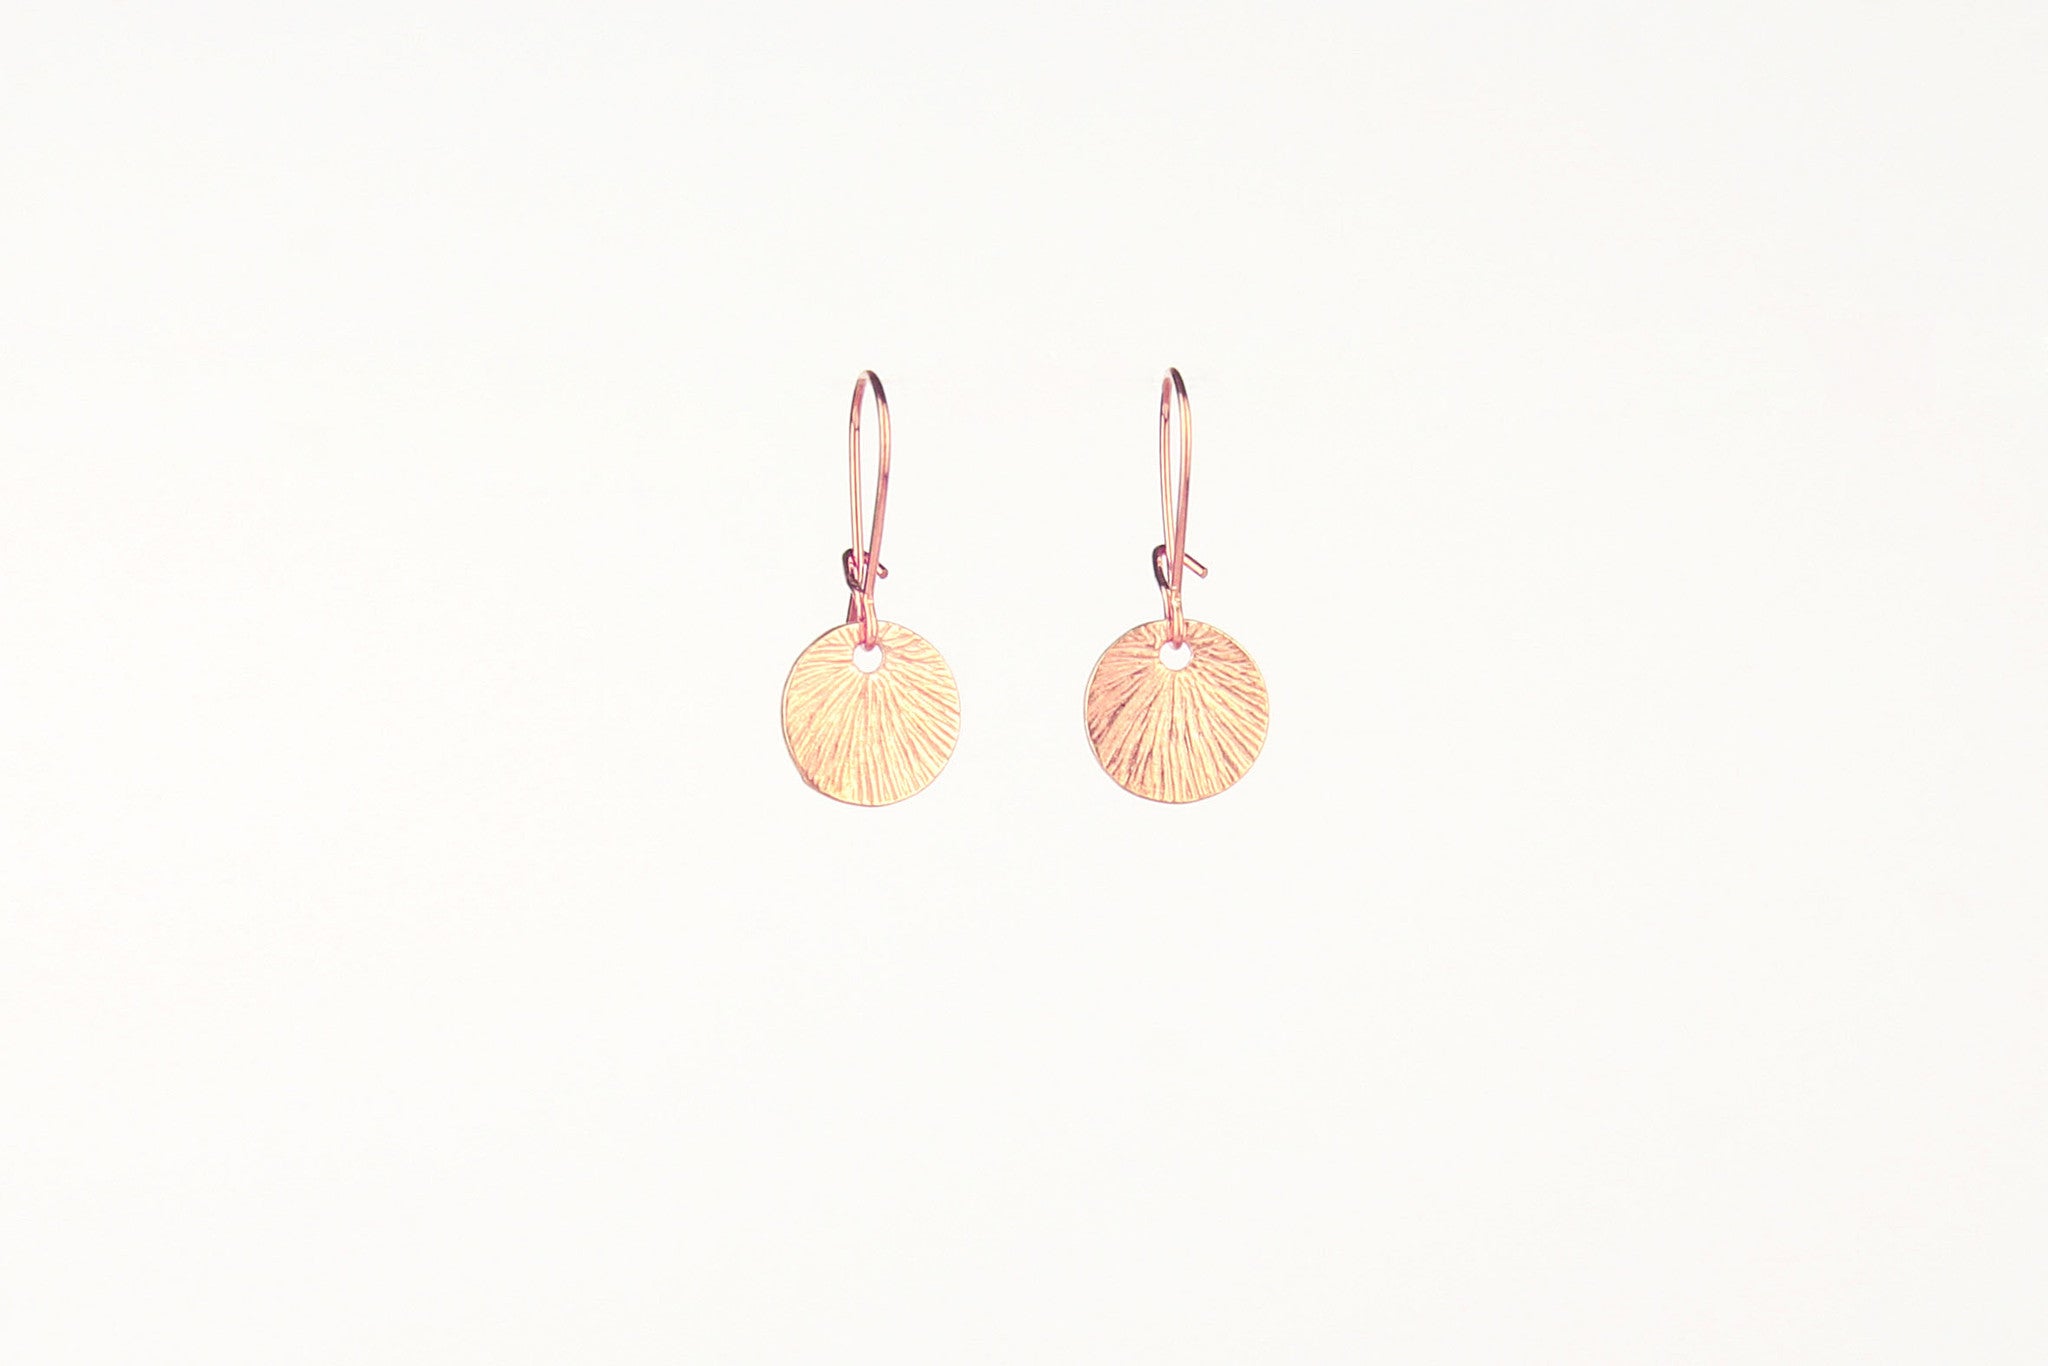 jewelberry ohrringe earrings small shell rose gold plated sterling silver fine jewelry handmade with love fairtrade